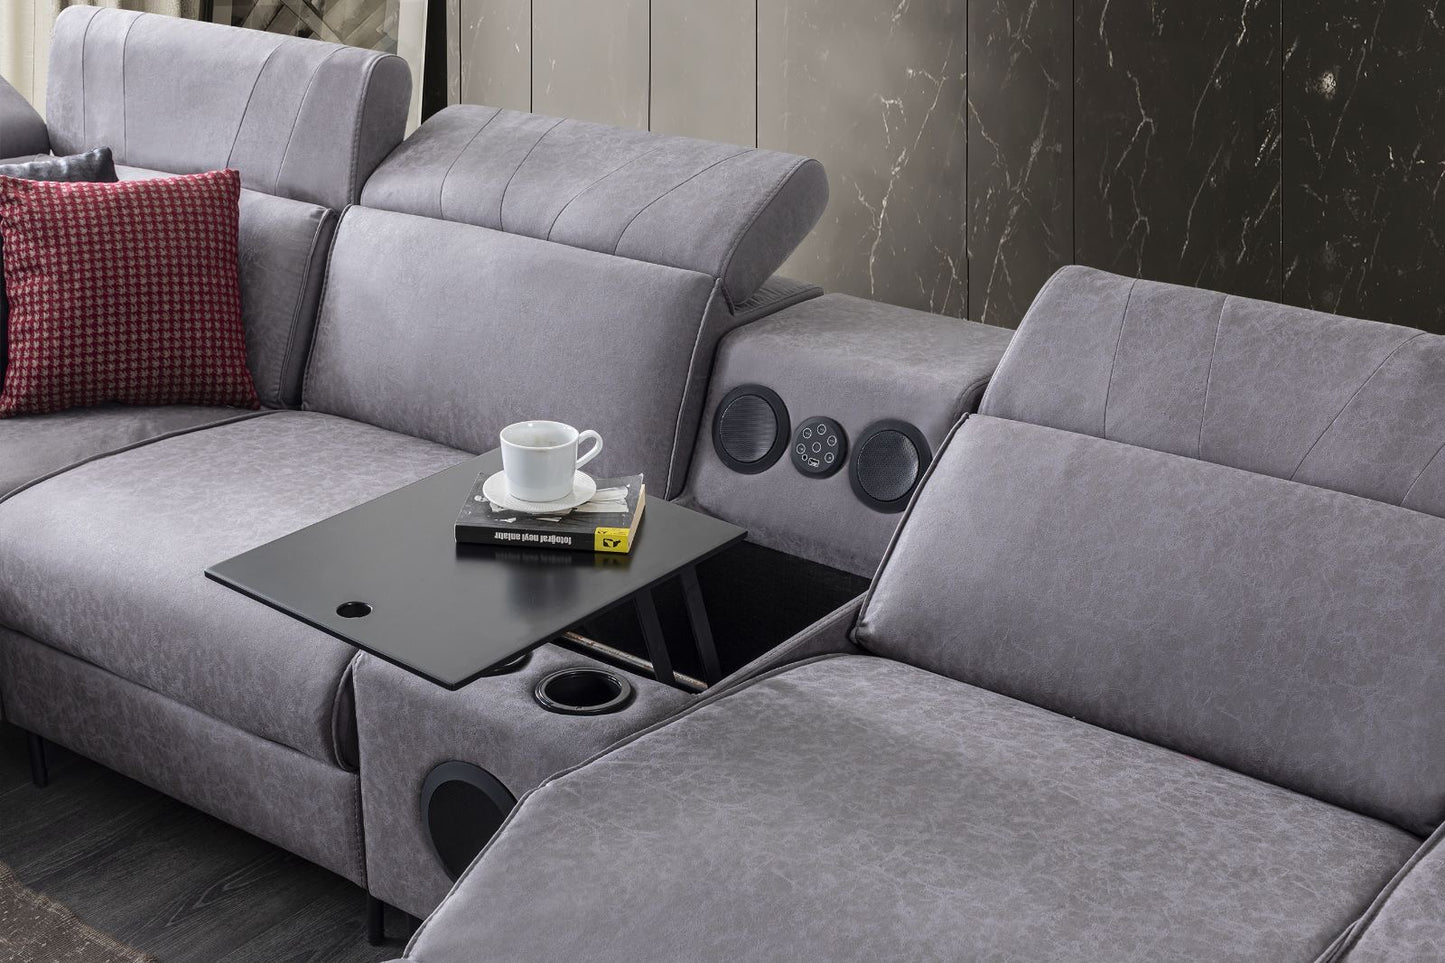 G-LR PANAHILL SECTIONAL LIVING ROOM SETTEE